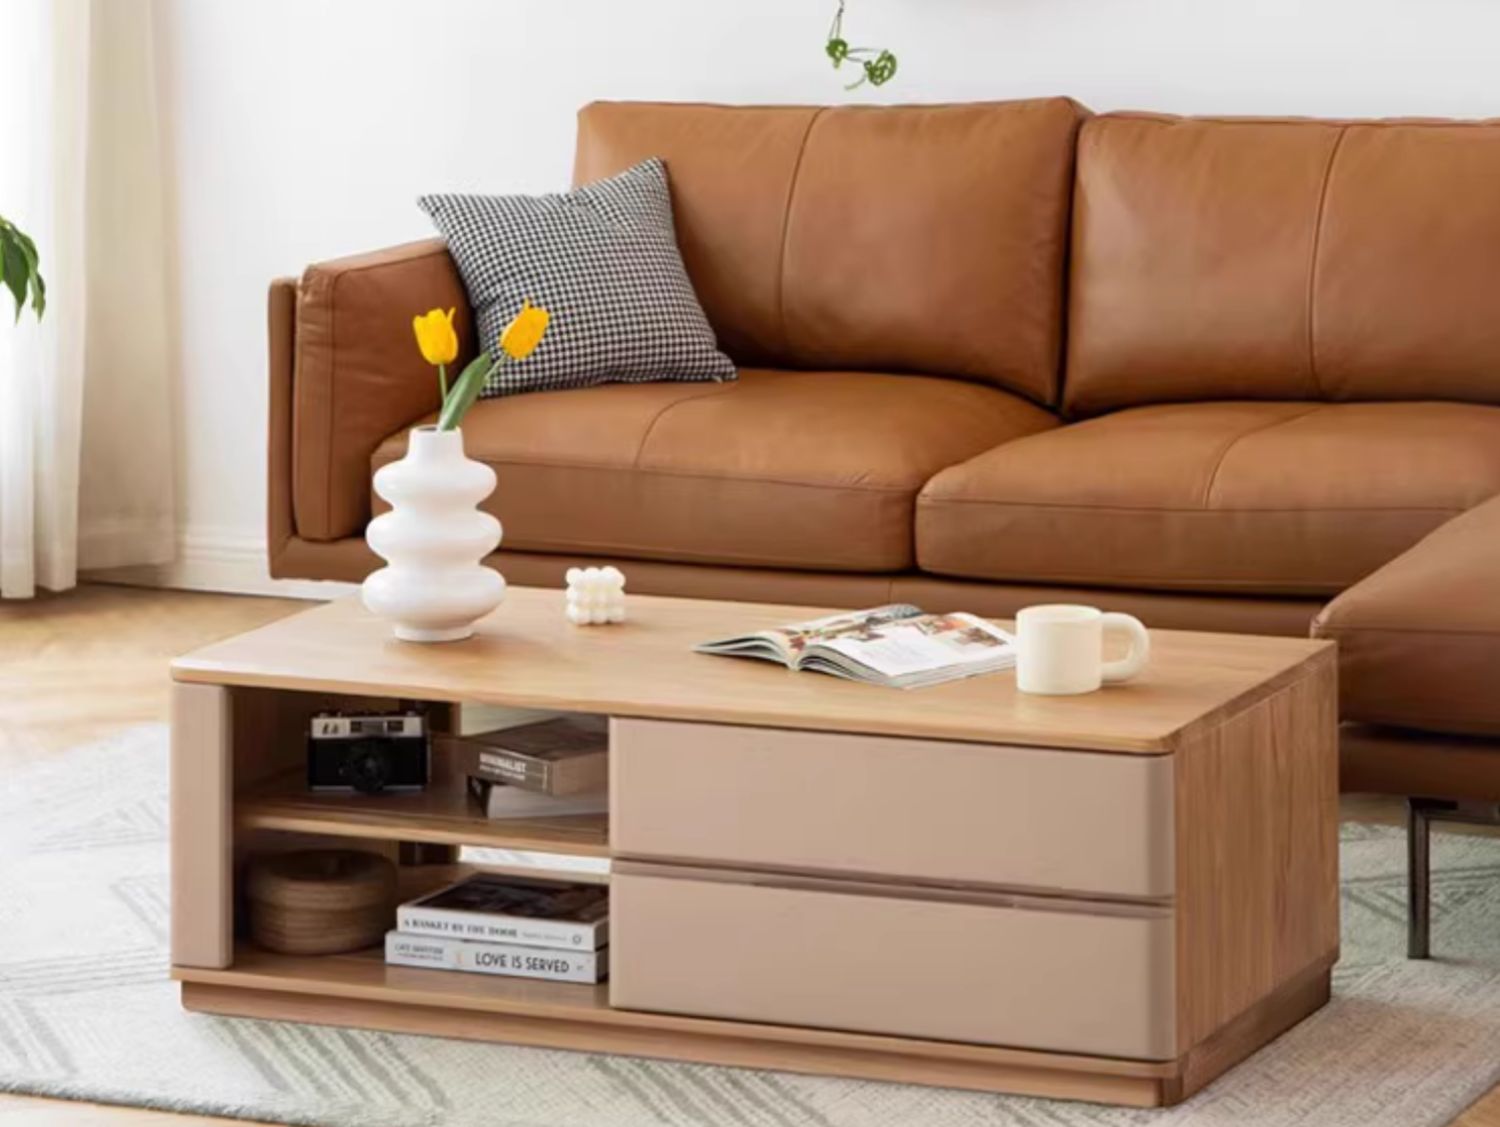 All solid wood coffee table stock clearance"